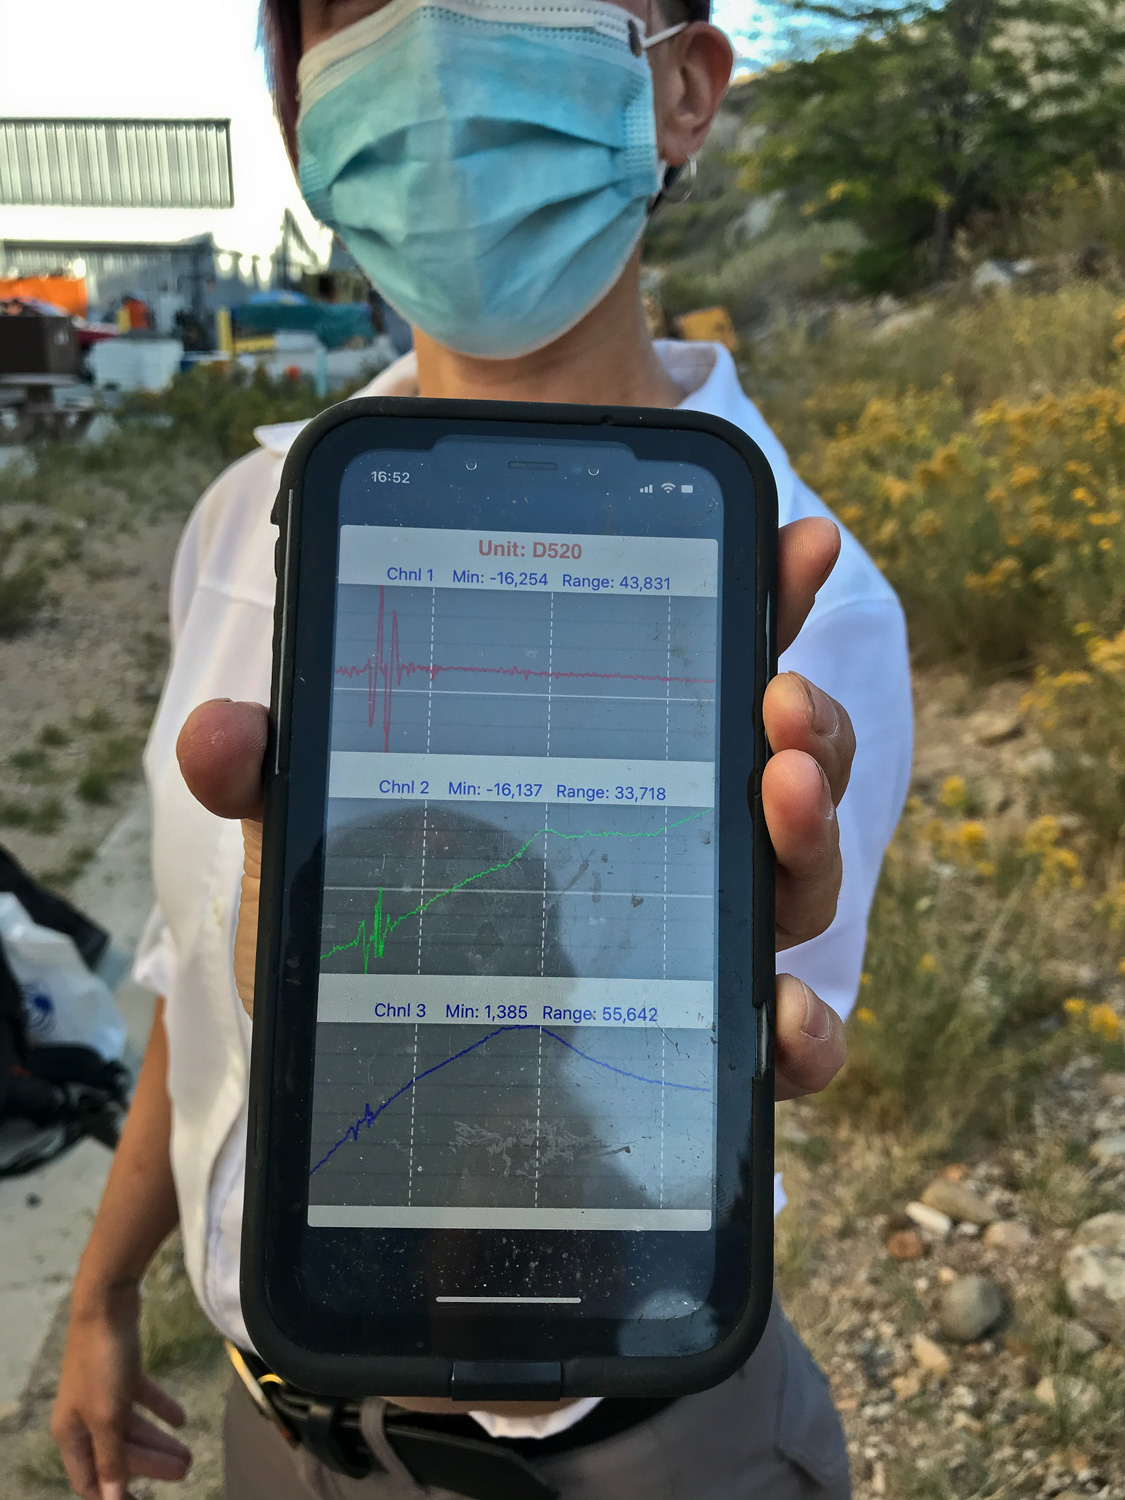 Kyren Bogolub shows an initial seismic trace from the installation. The seismometer will be recording ground movement continuously for several weeks, providing data for class analysis and interpretation. Photo credit: Ebru Bozdag.